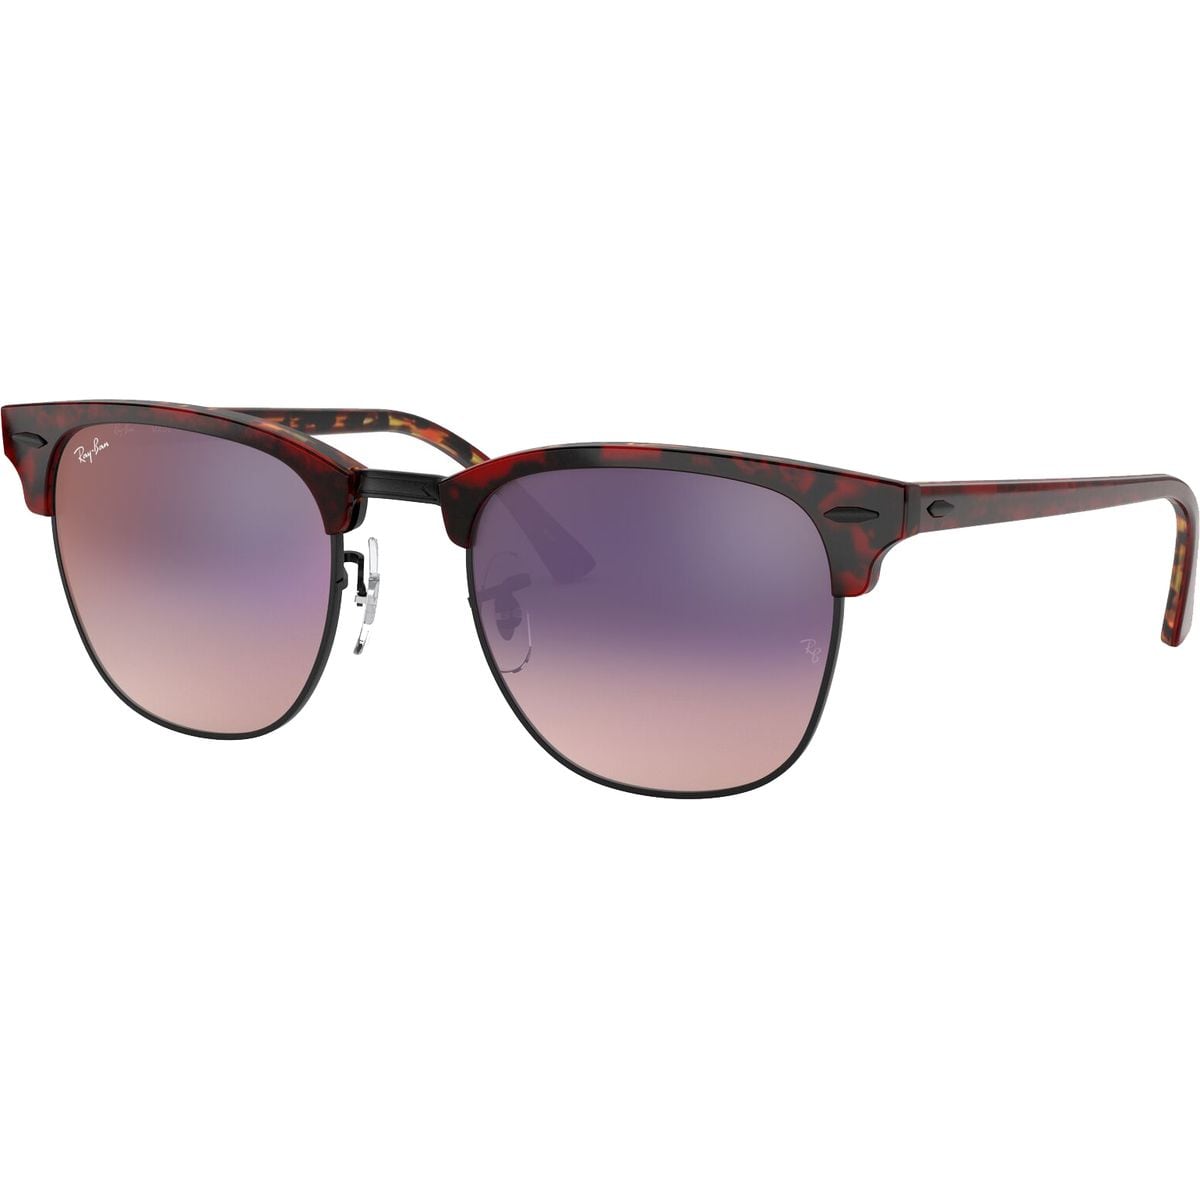 Ray-Ban Clubmaster Sunglasses...